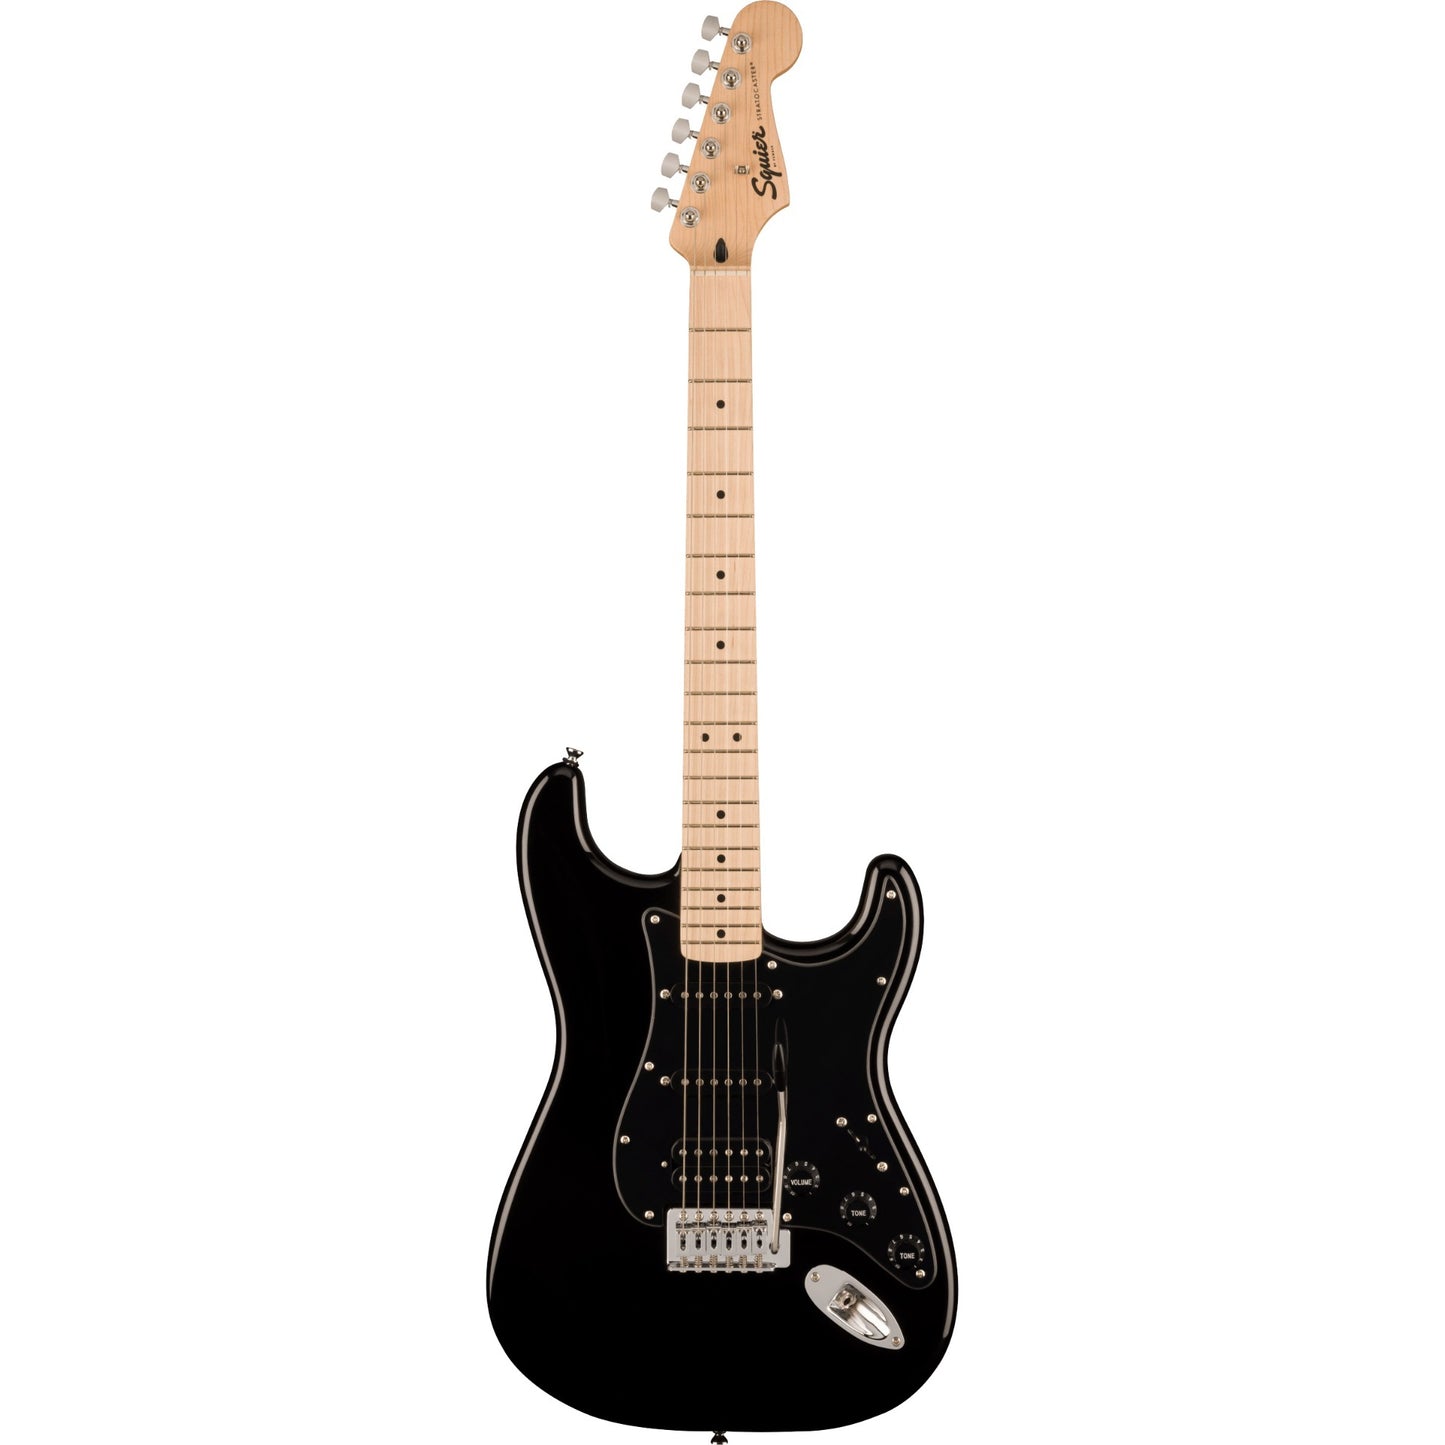 Squier Sonic Stratocaster HSS, Black Pickguard, Electric Guitar in Black